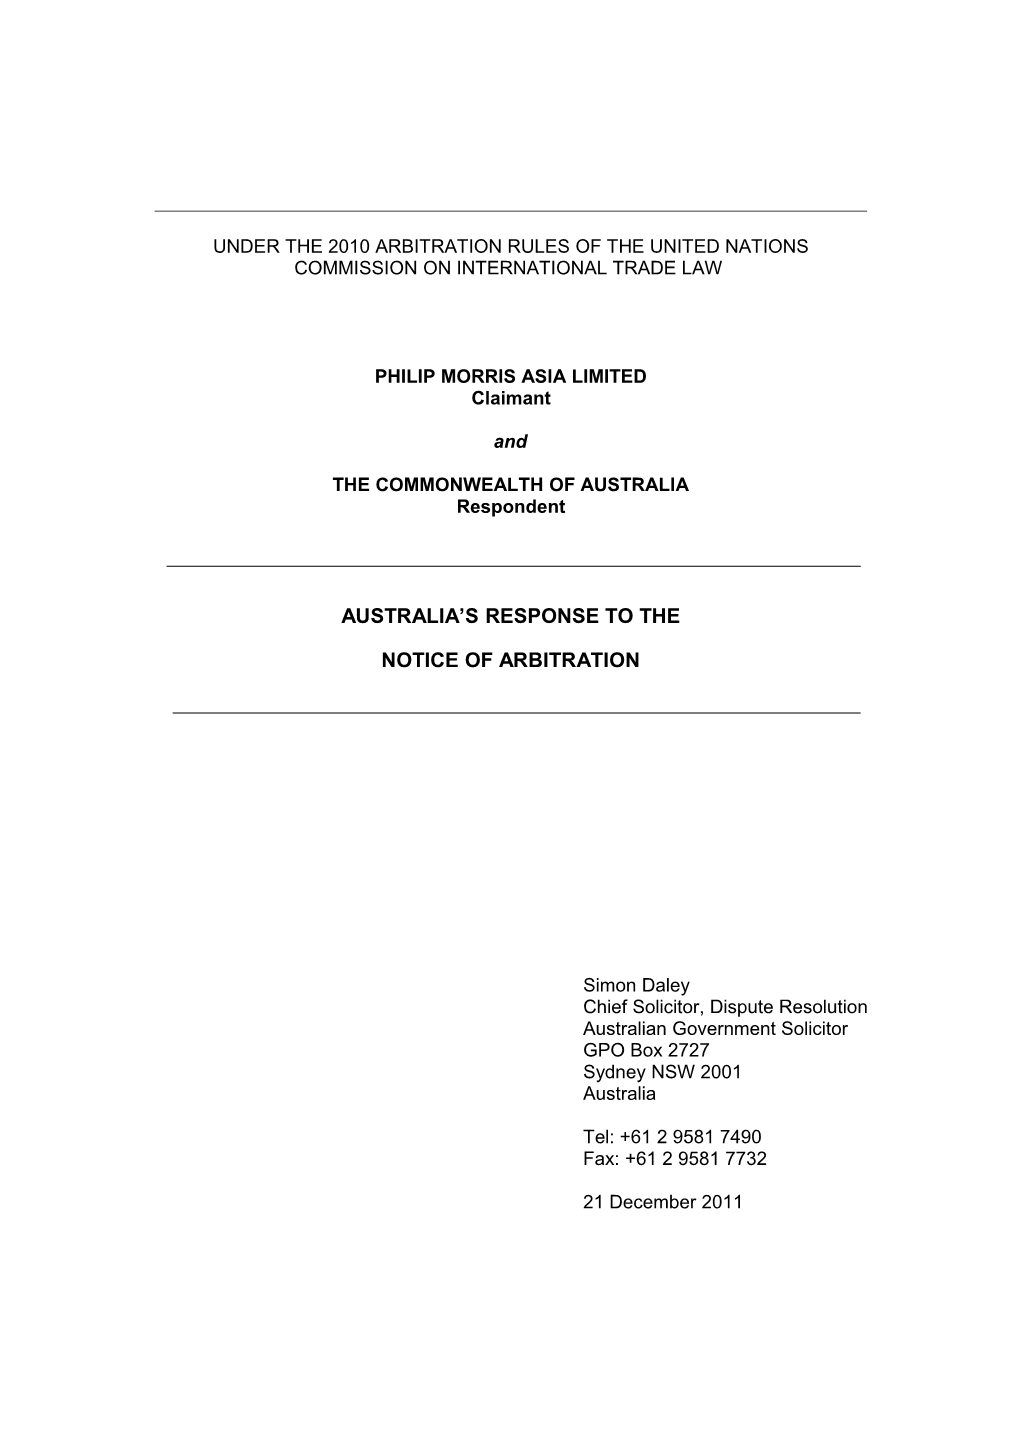 Under the 2010 Arbitration Rules of the United Nations